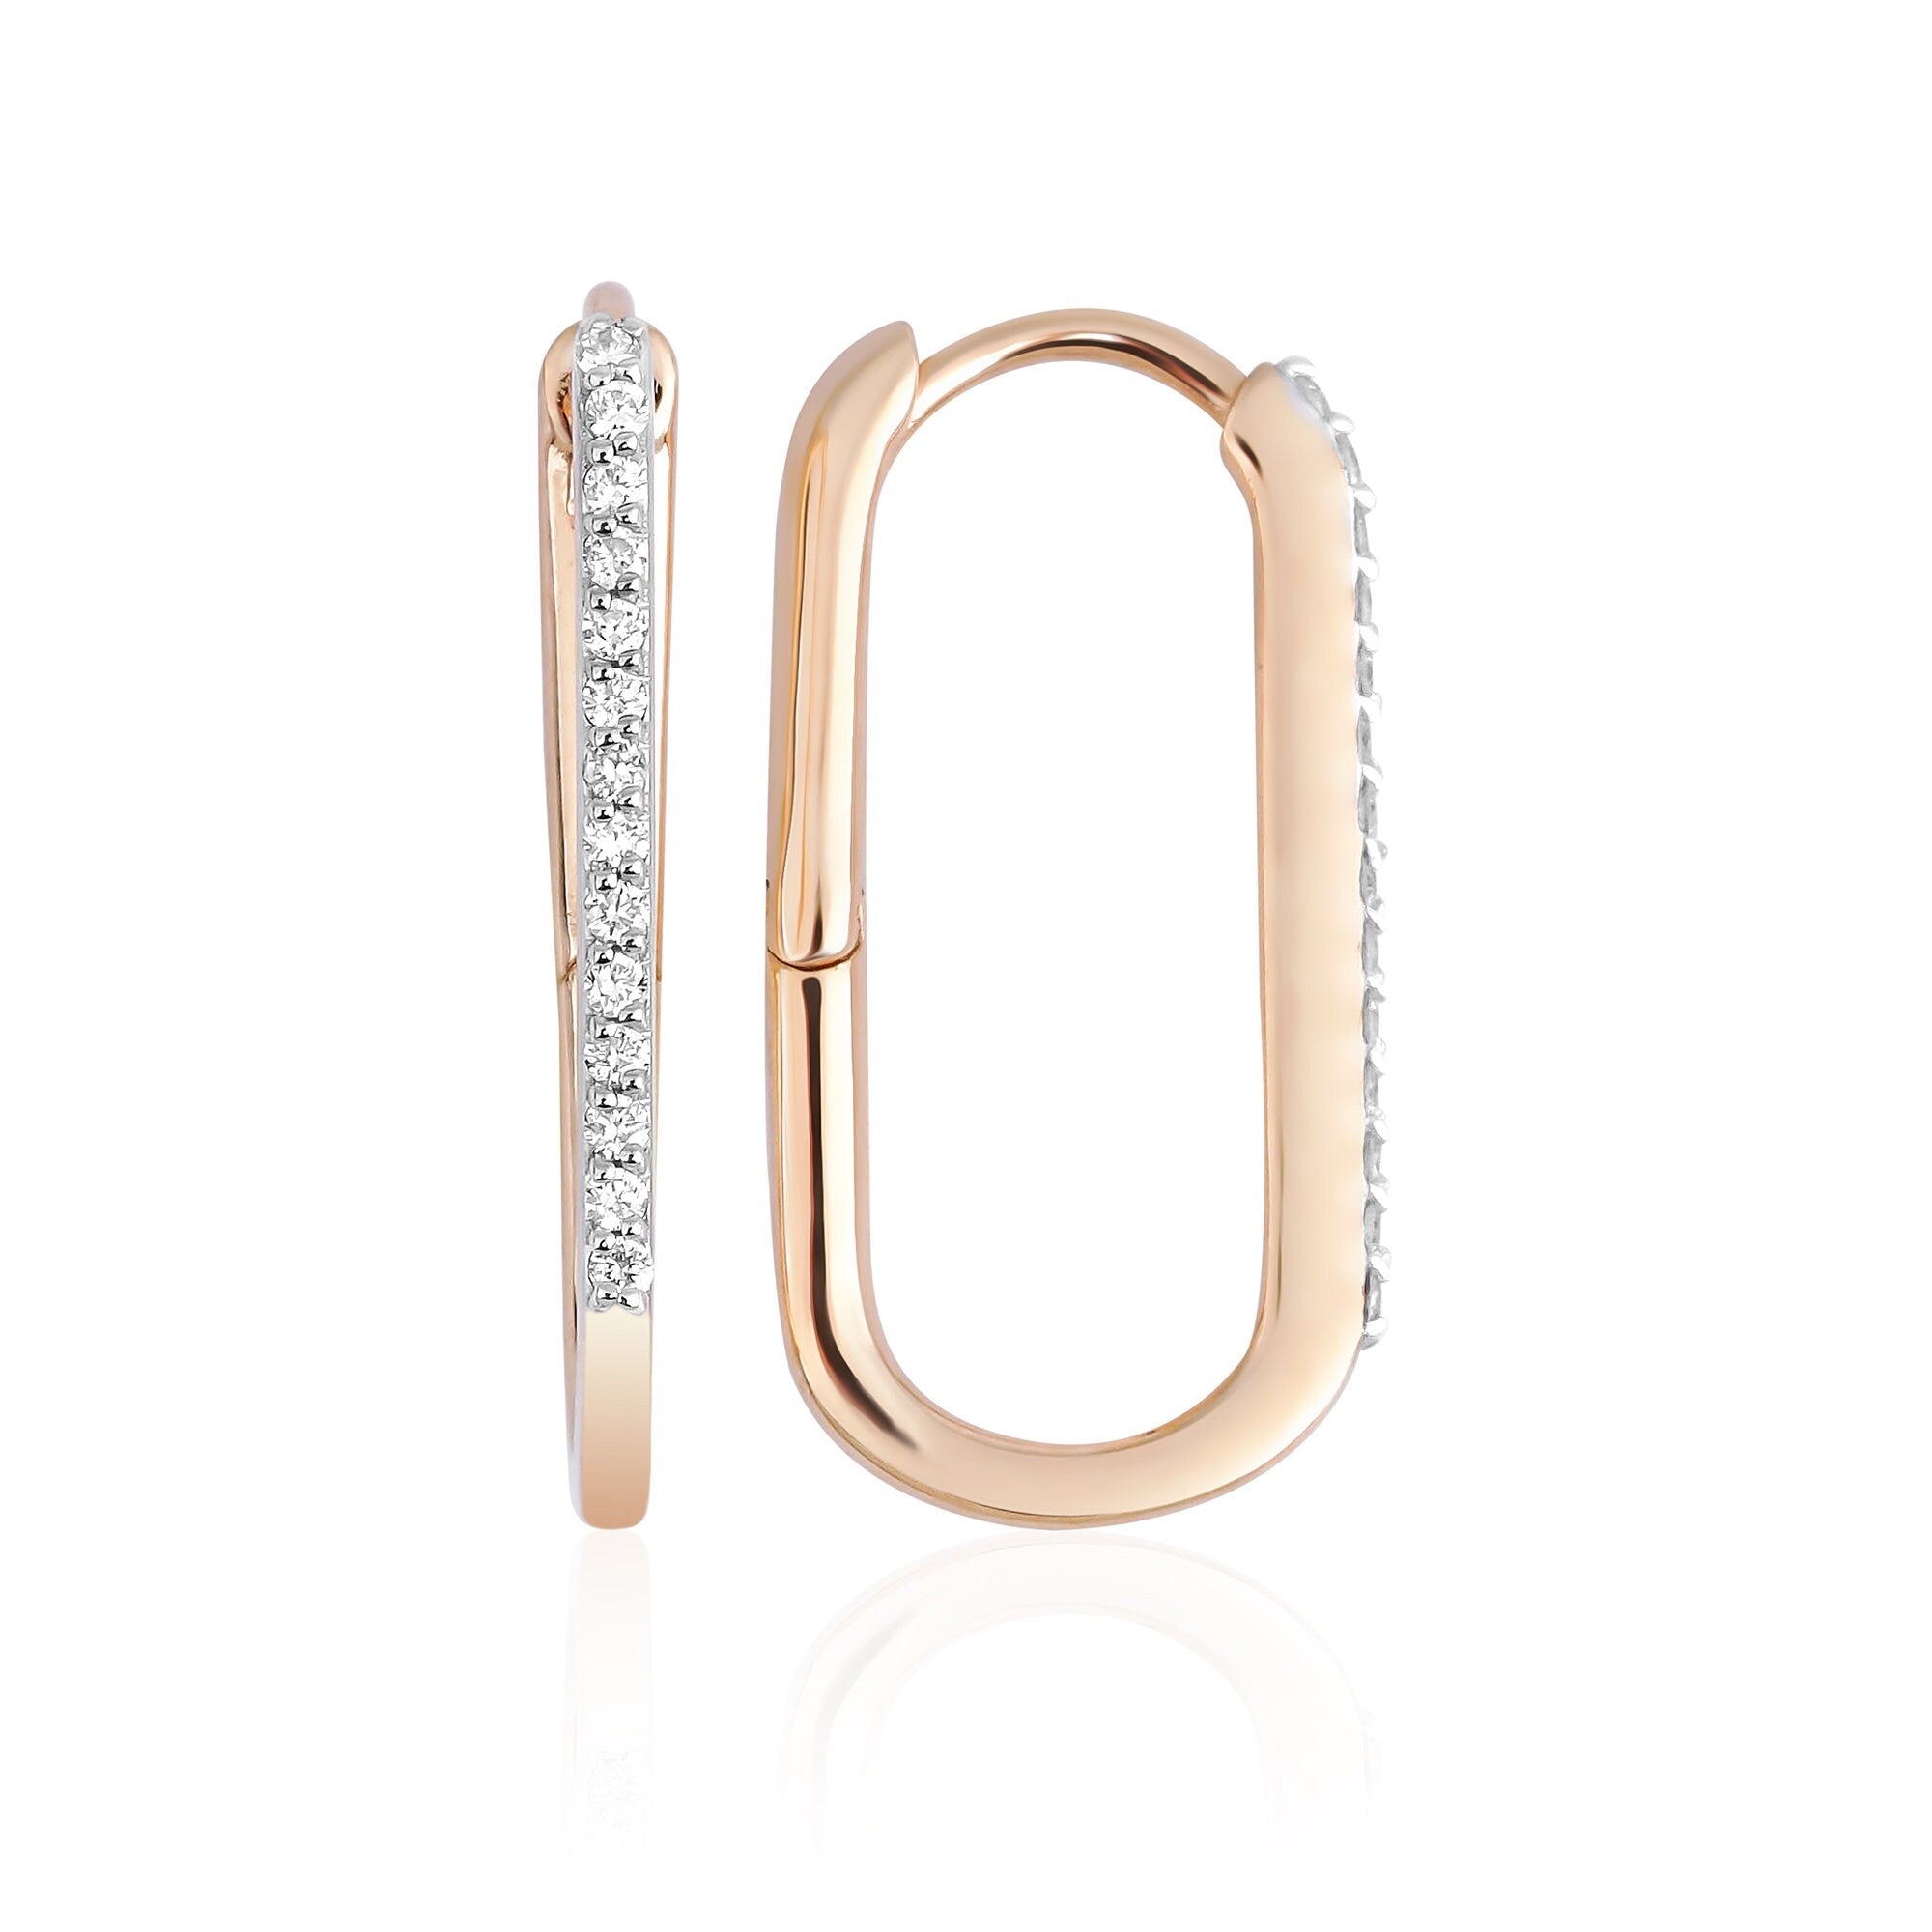 Diamond Rectangle Hoop Earrings Available in 14K and 18K Gold